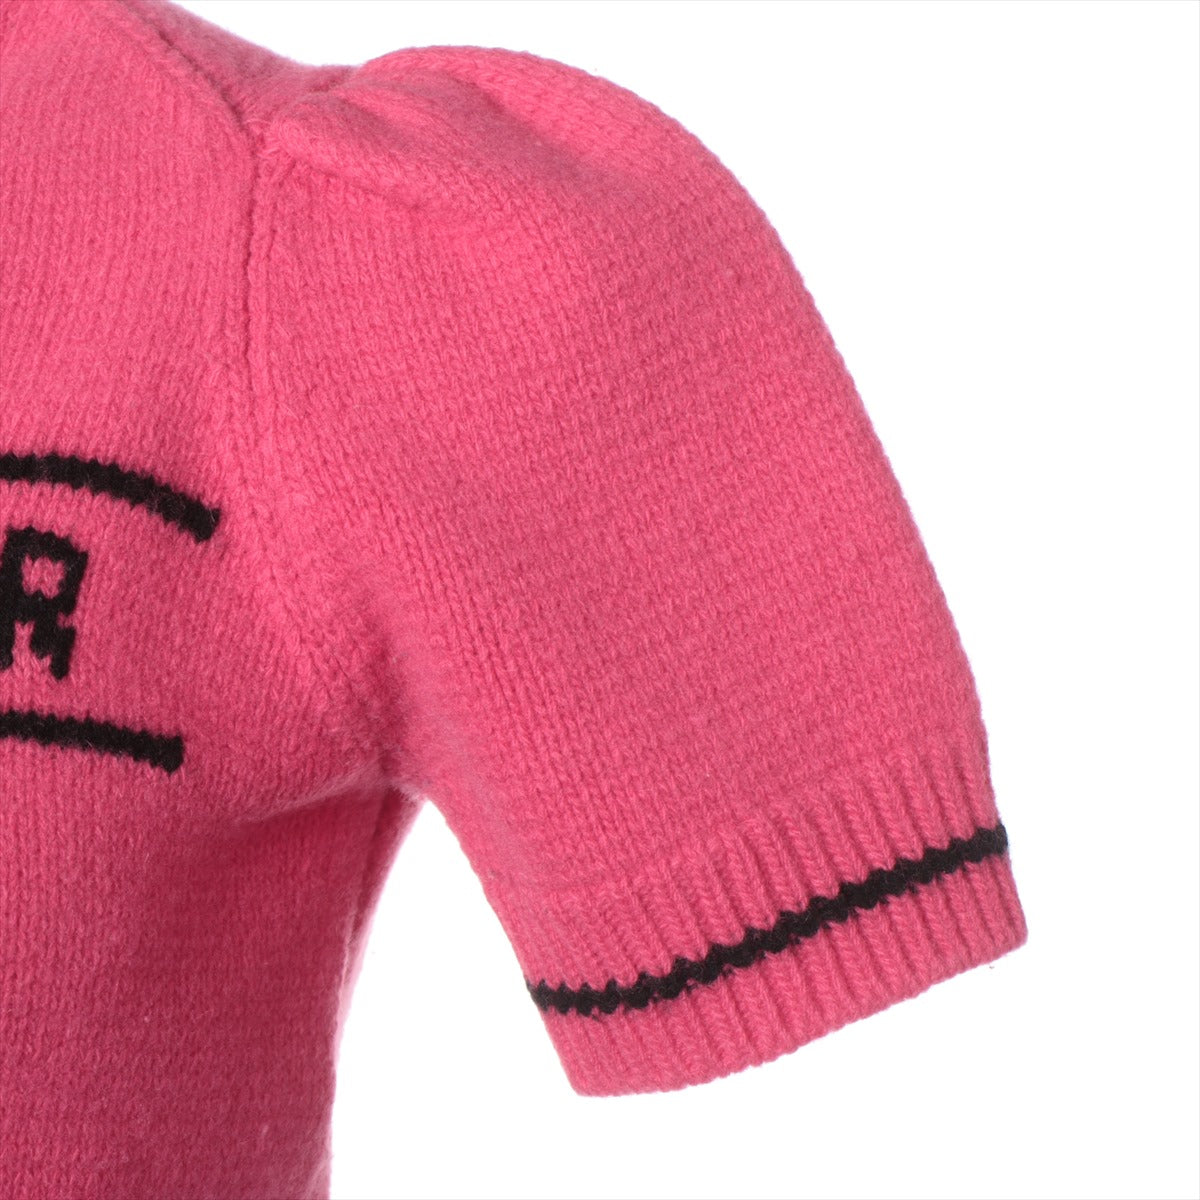 Christian Dior Wool & Cashmere Short Sleeve Knitwear F38 Ladies' Pink  Logo embroidery cropped 224S09AM308